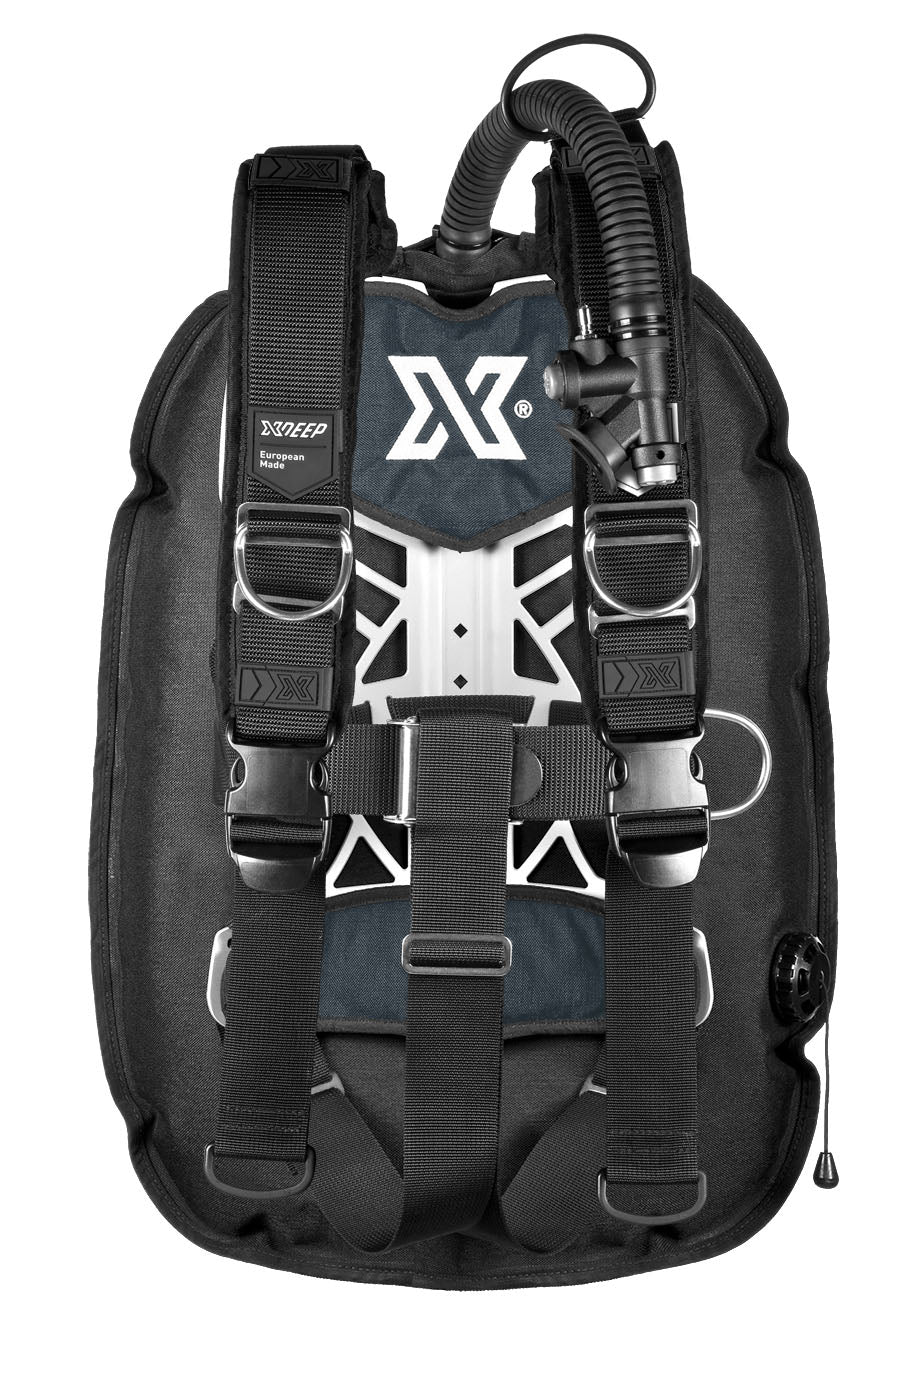 XDEEP XDEEP GHOST Full Setup with Standard or Deluxe harness Dark Grey / Deluxe / Small - Oyster Diving